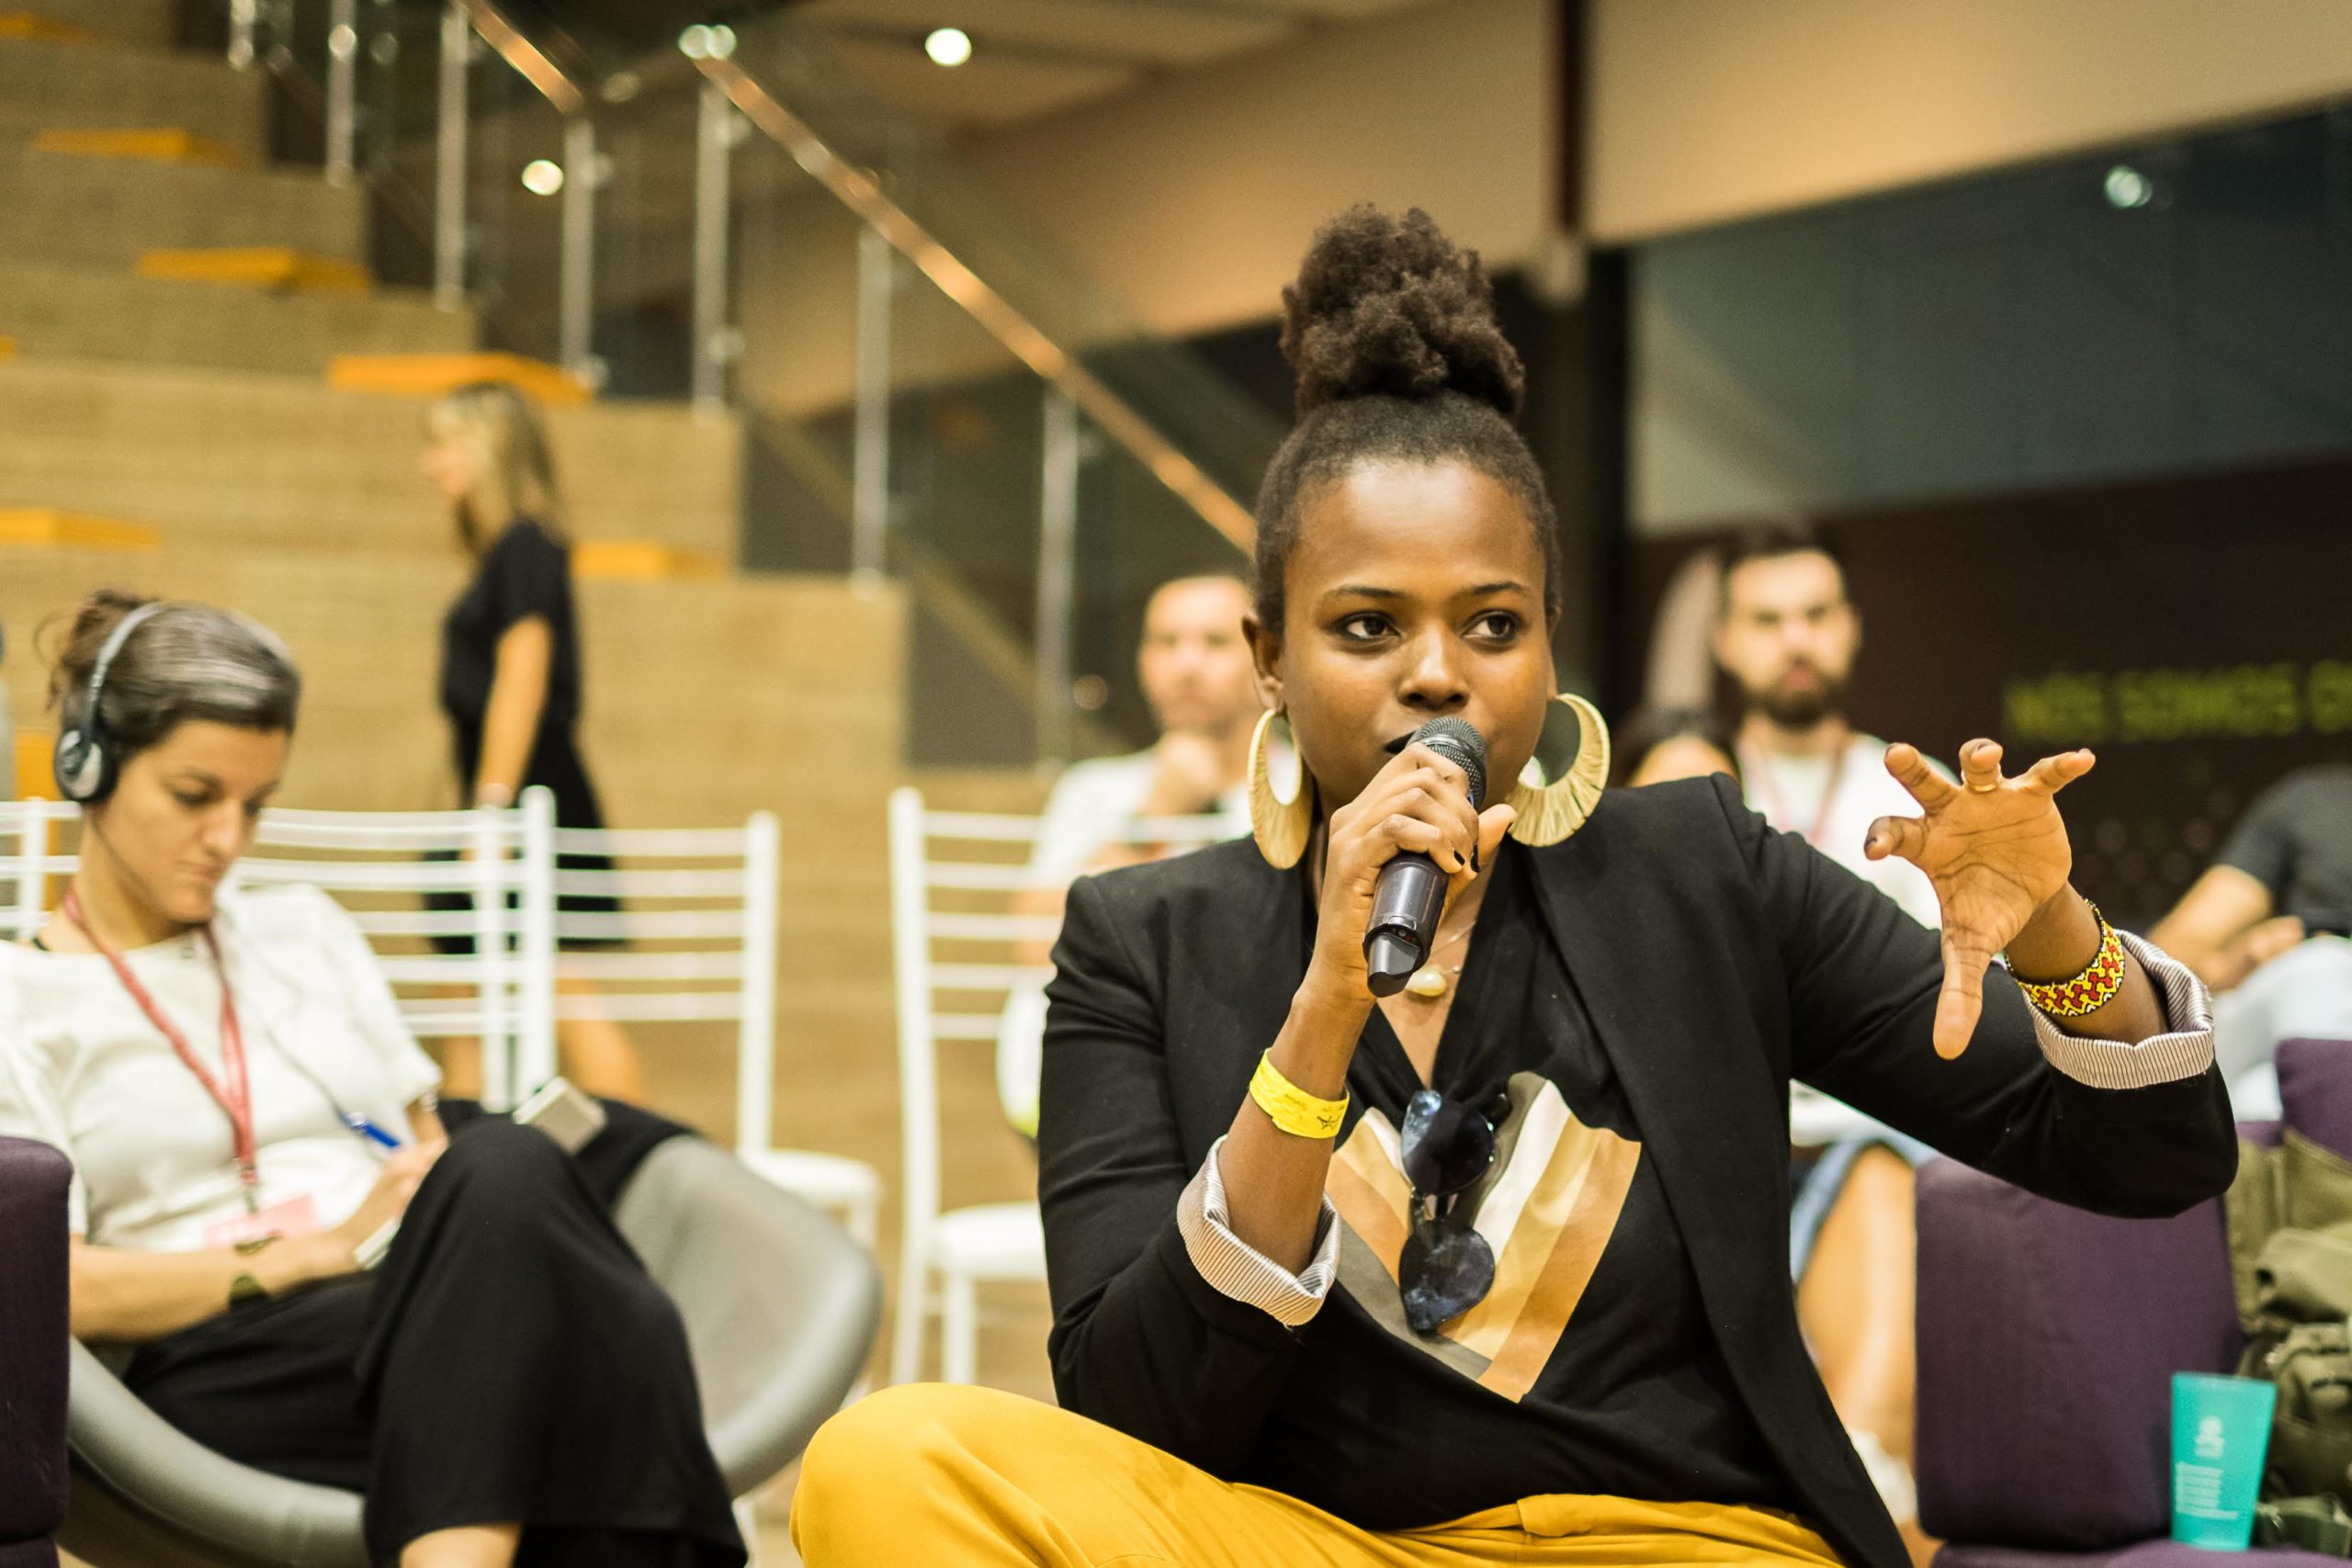 A young black woman holding a microphone addressing a crowd of Impact Hub Makers at a global gathering